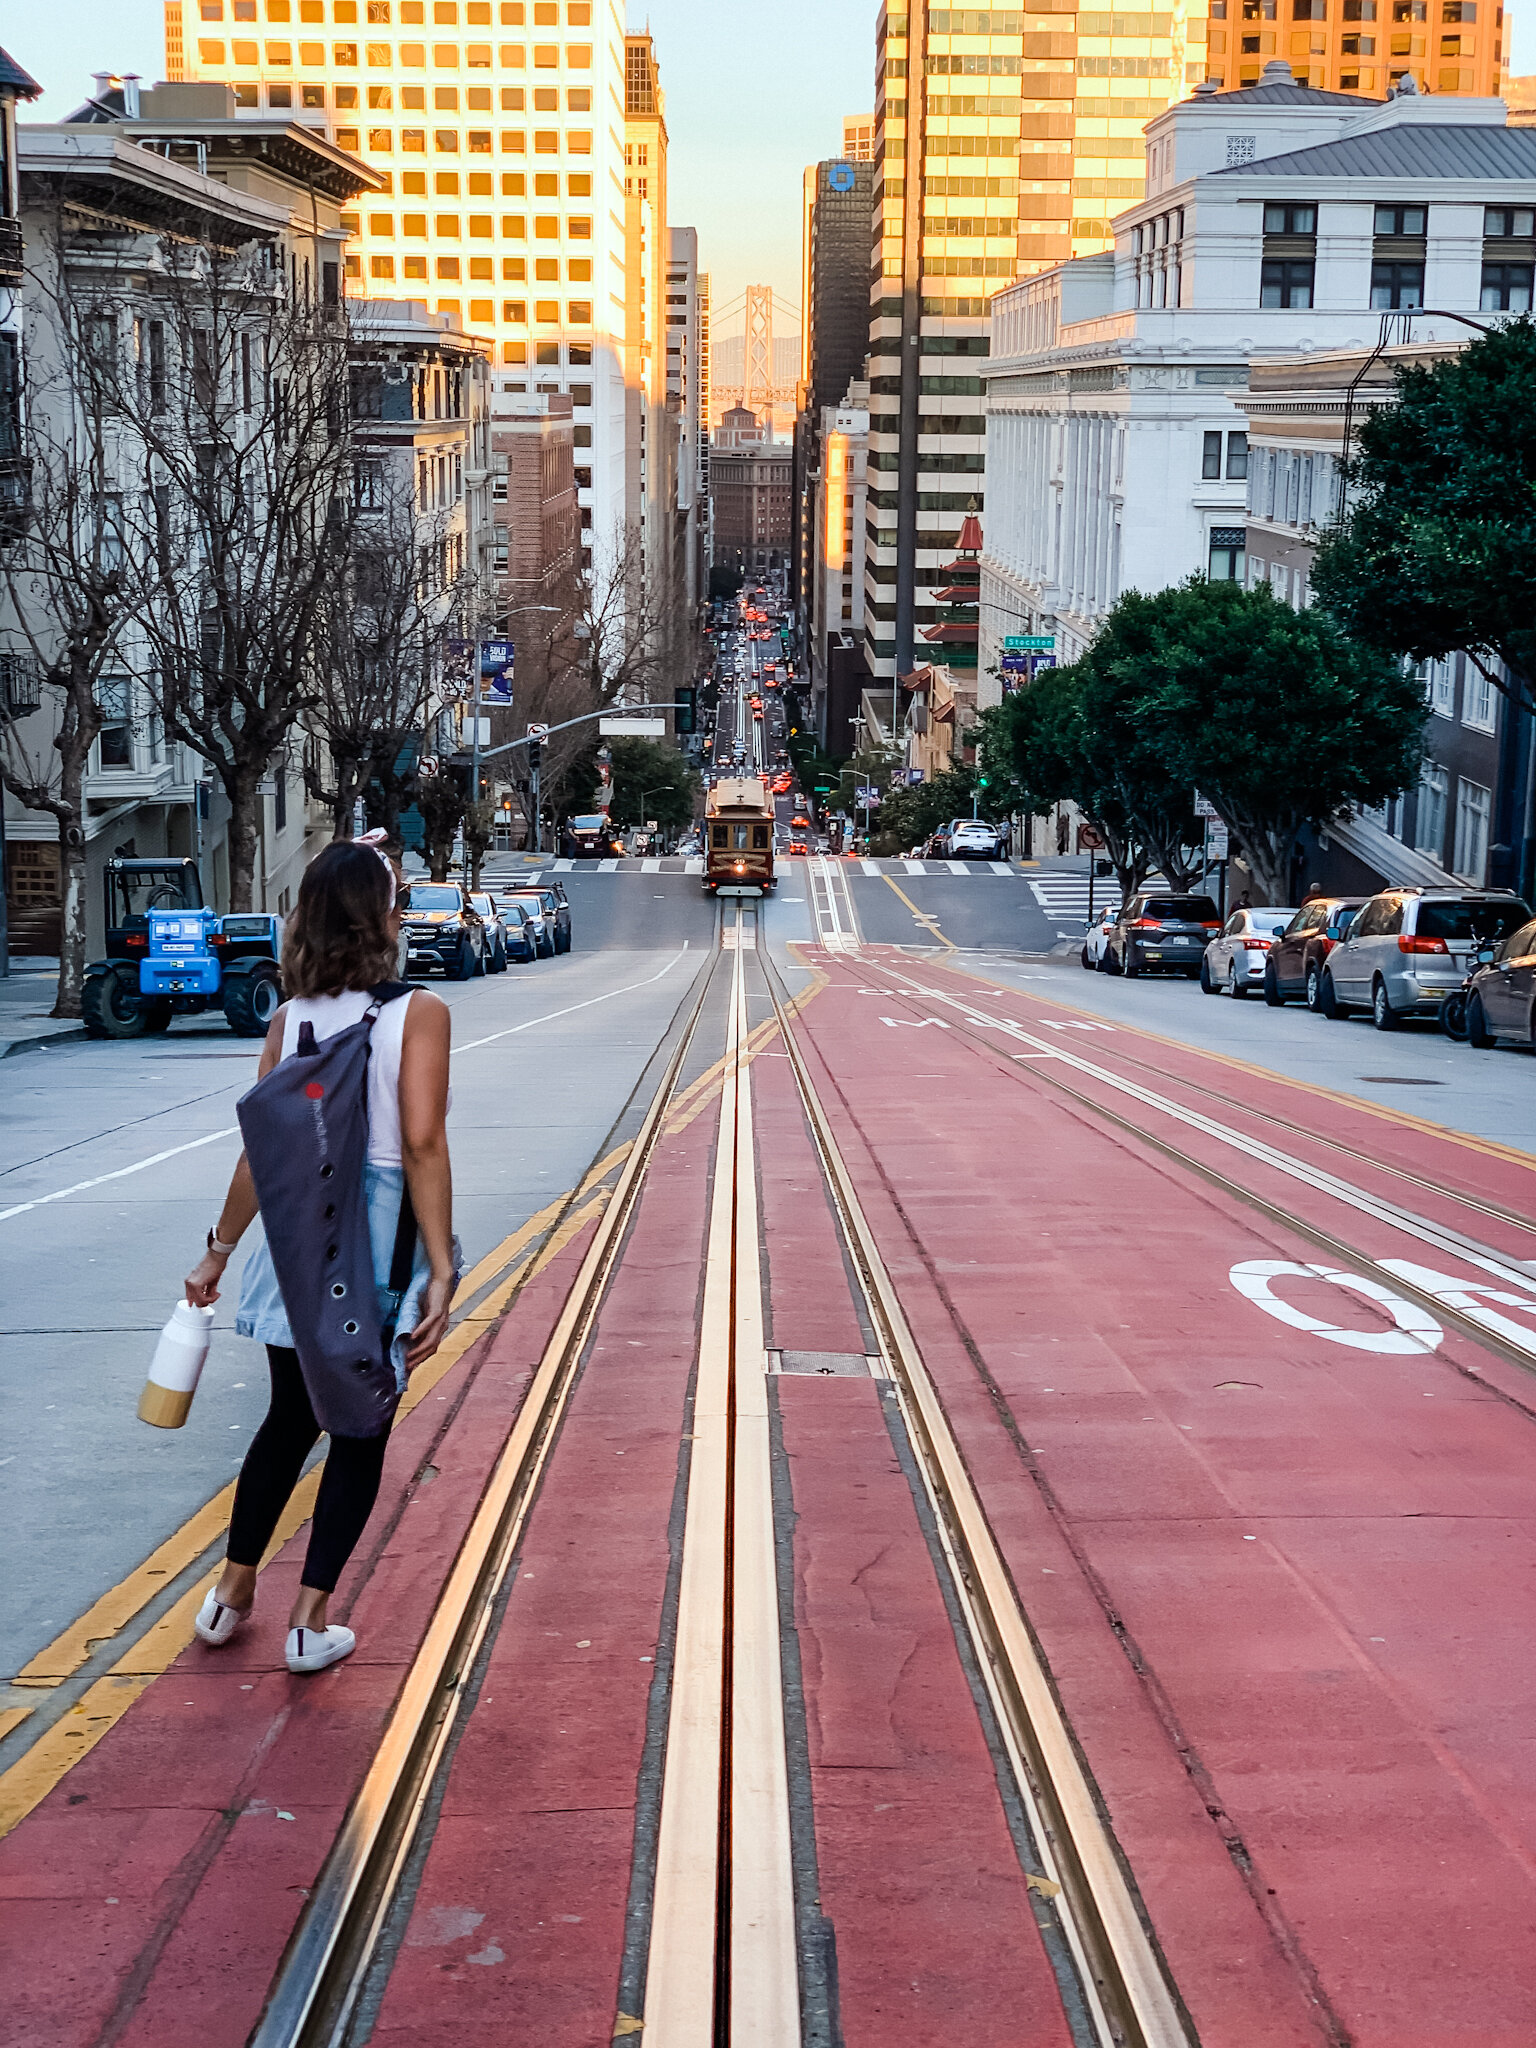 Insider's Guide To San Francisco's Nob Hill image asset